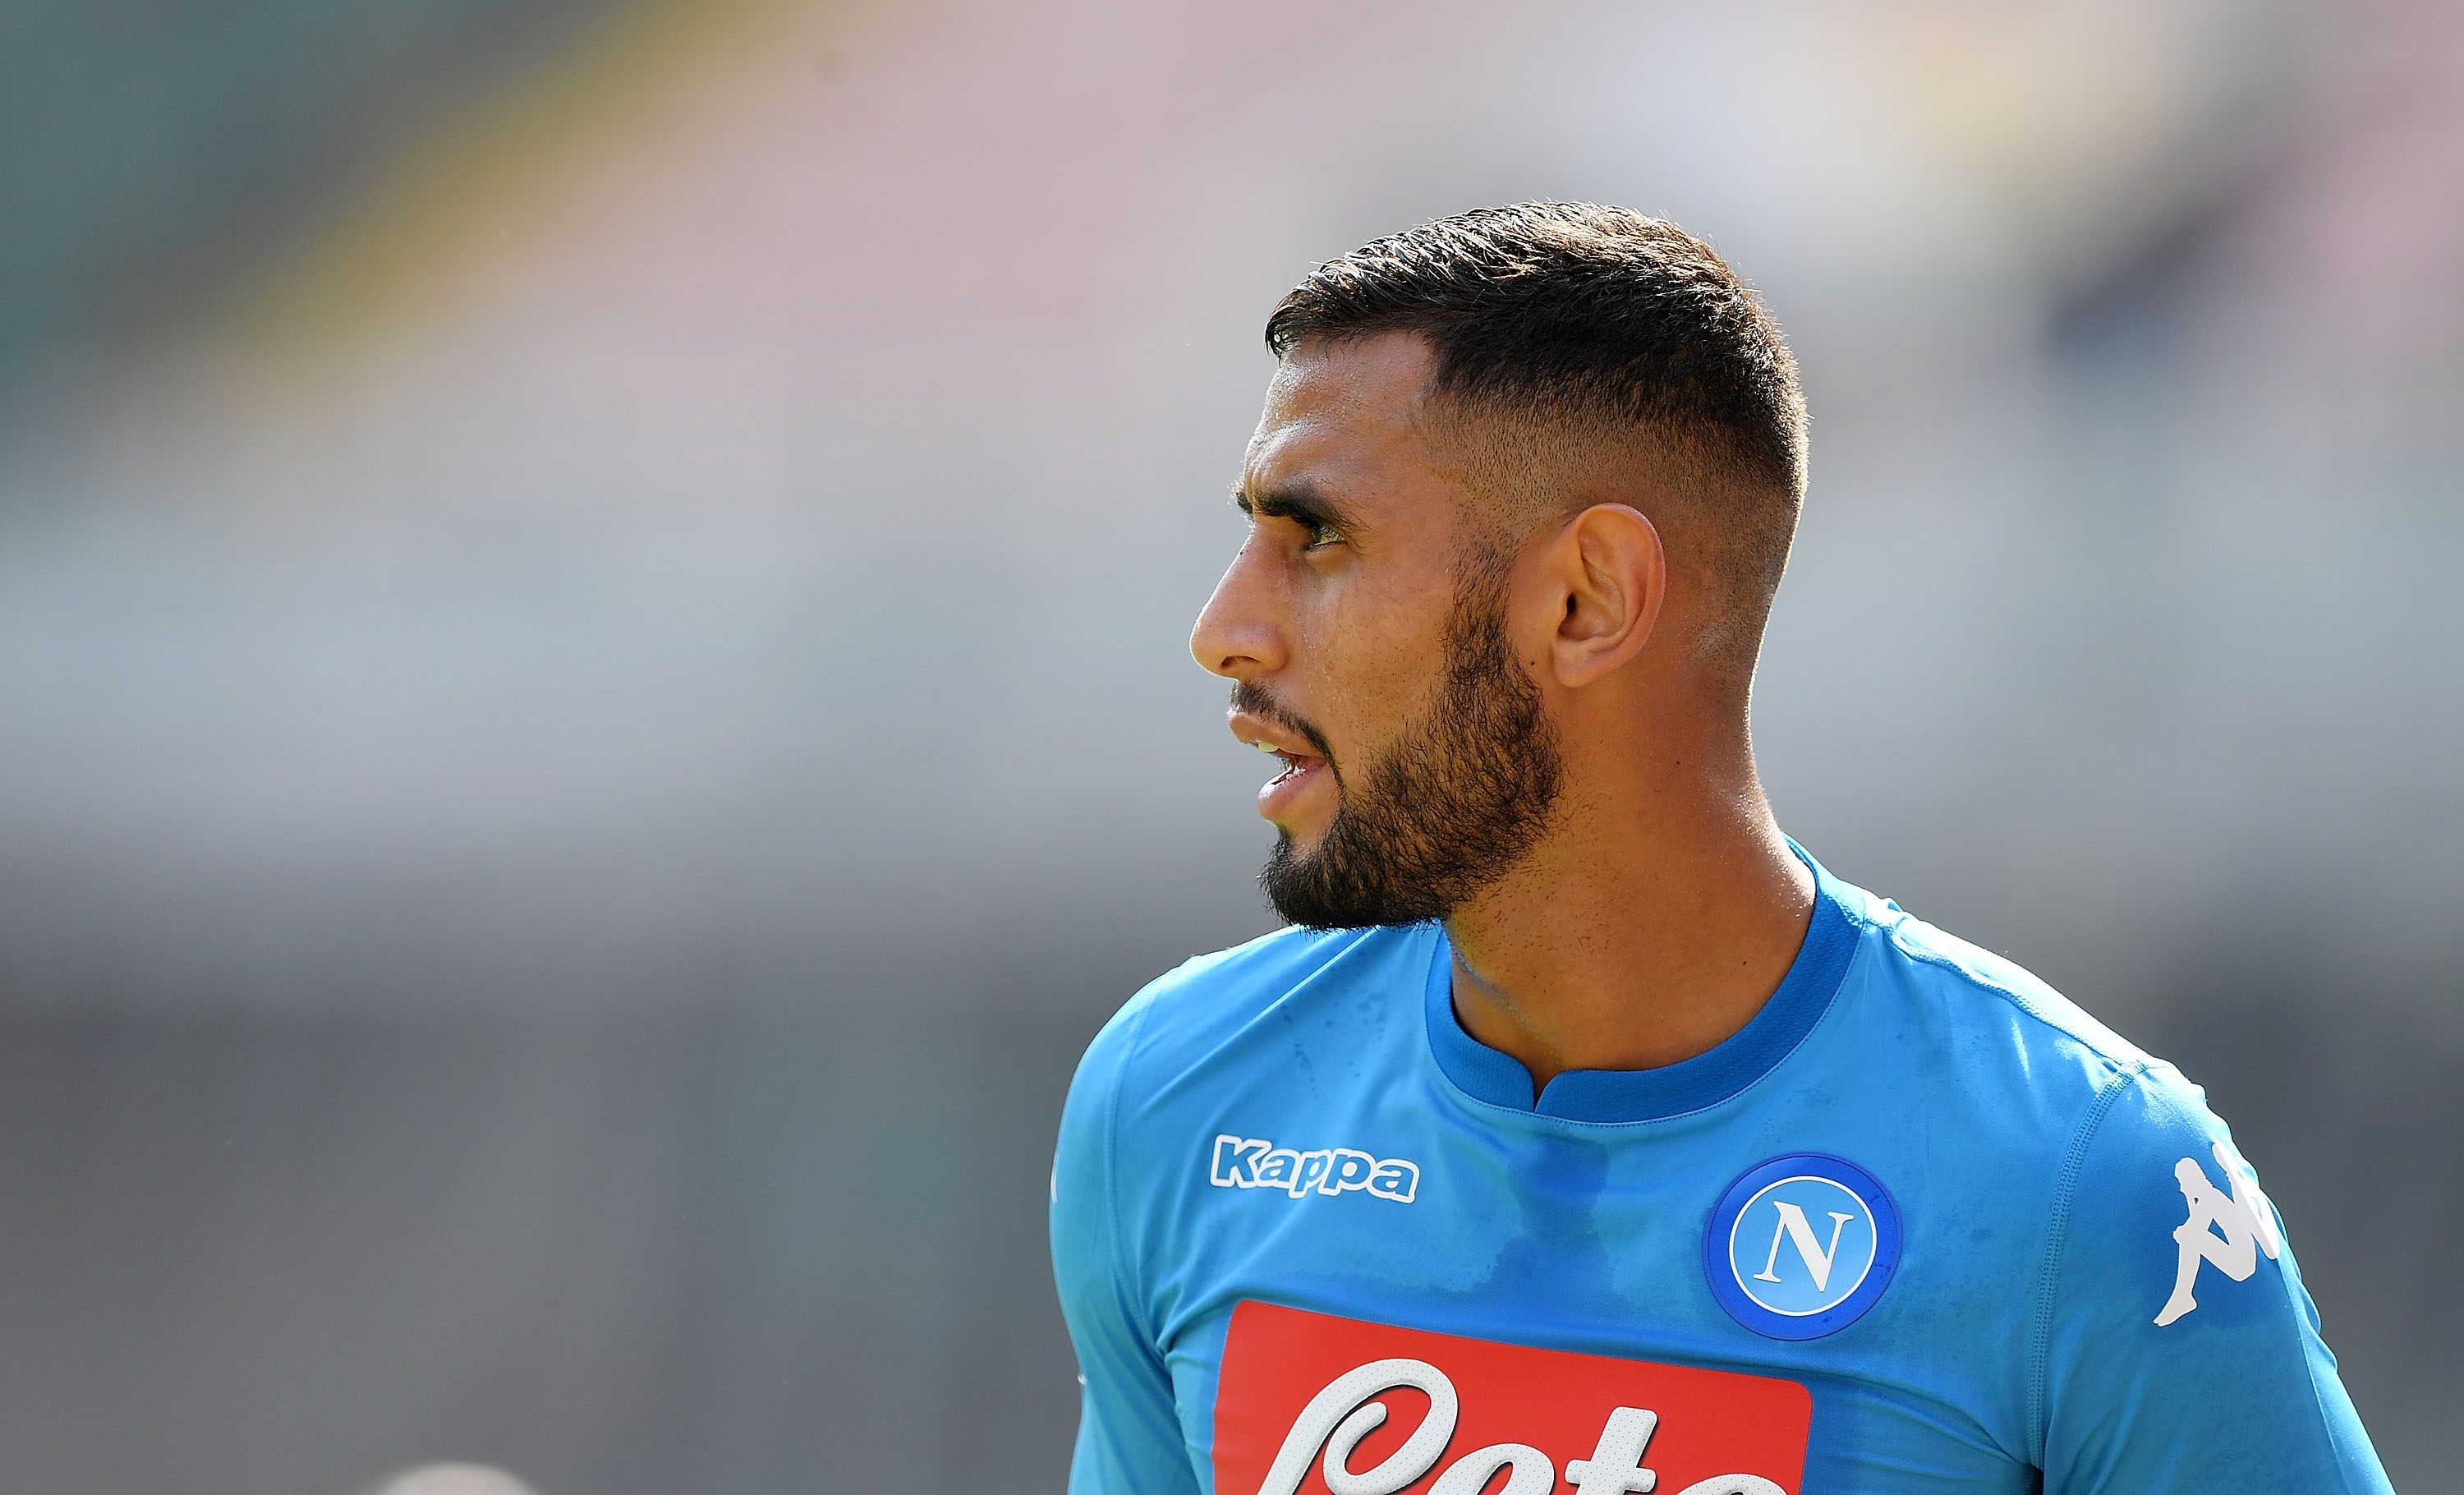 NAPLES, ITALY - OCTOBER 01:  Faouzi Ghoulam of SSC Napoli in action during the Serie A match between SSC Napoli and Cagliari Calcio at Stadio San Paolo on October 1, 2017 in Naples, Italy.  (Photo by Francesco Pecoraro/Getty Images)